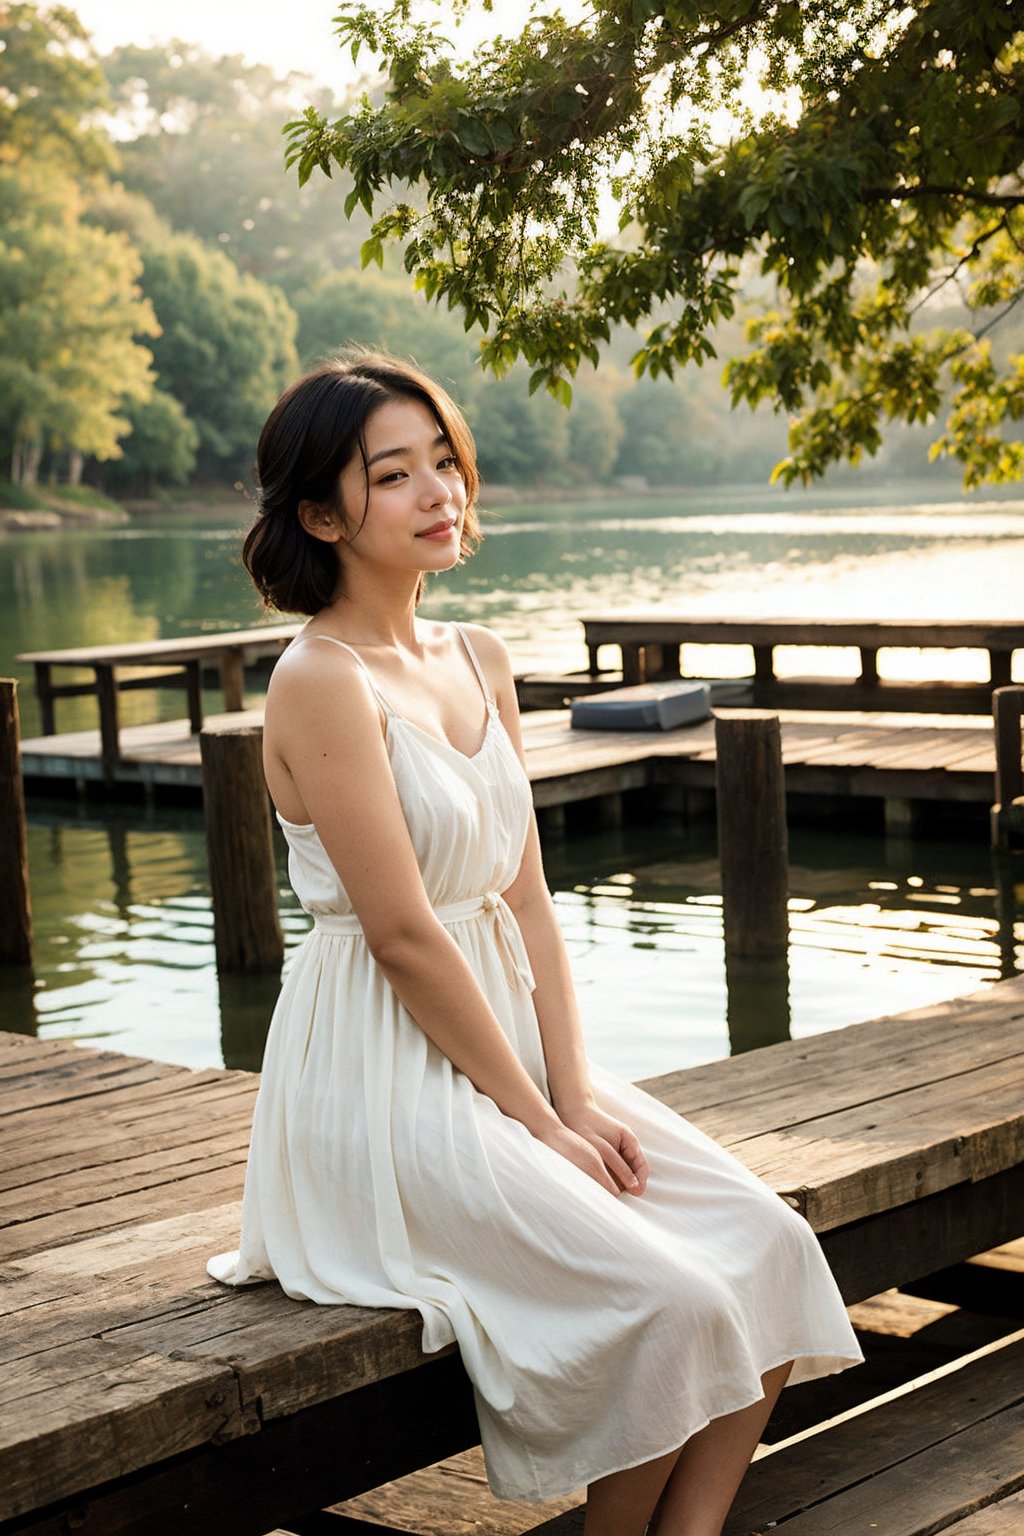 A serene woman sits alone on a weathered wooden dock, surrounded by the tranquil atmosphere of a misty morning lake. Soft golden light filters through the trees, casting a warm glow on her peaceful face. She wears a simple white dress, slightly rumpled from the gentle breeze, and has one hand gently holding a worn leather book, while the other cradles a steaming cup of coffee.